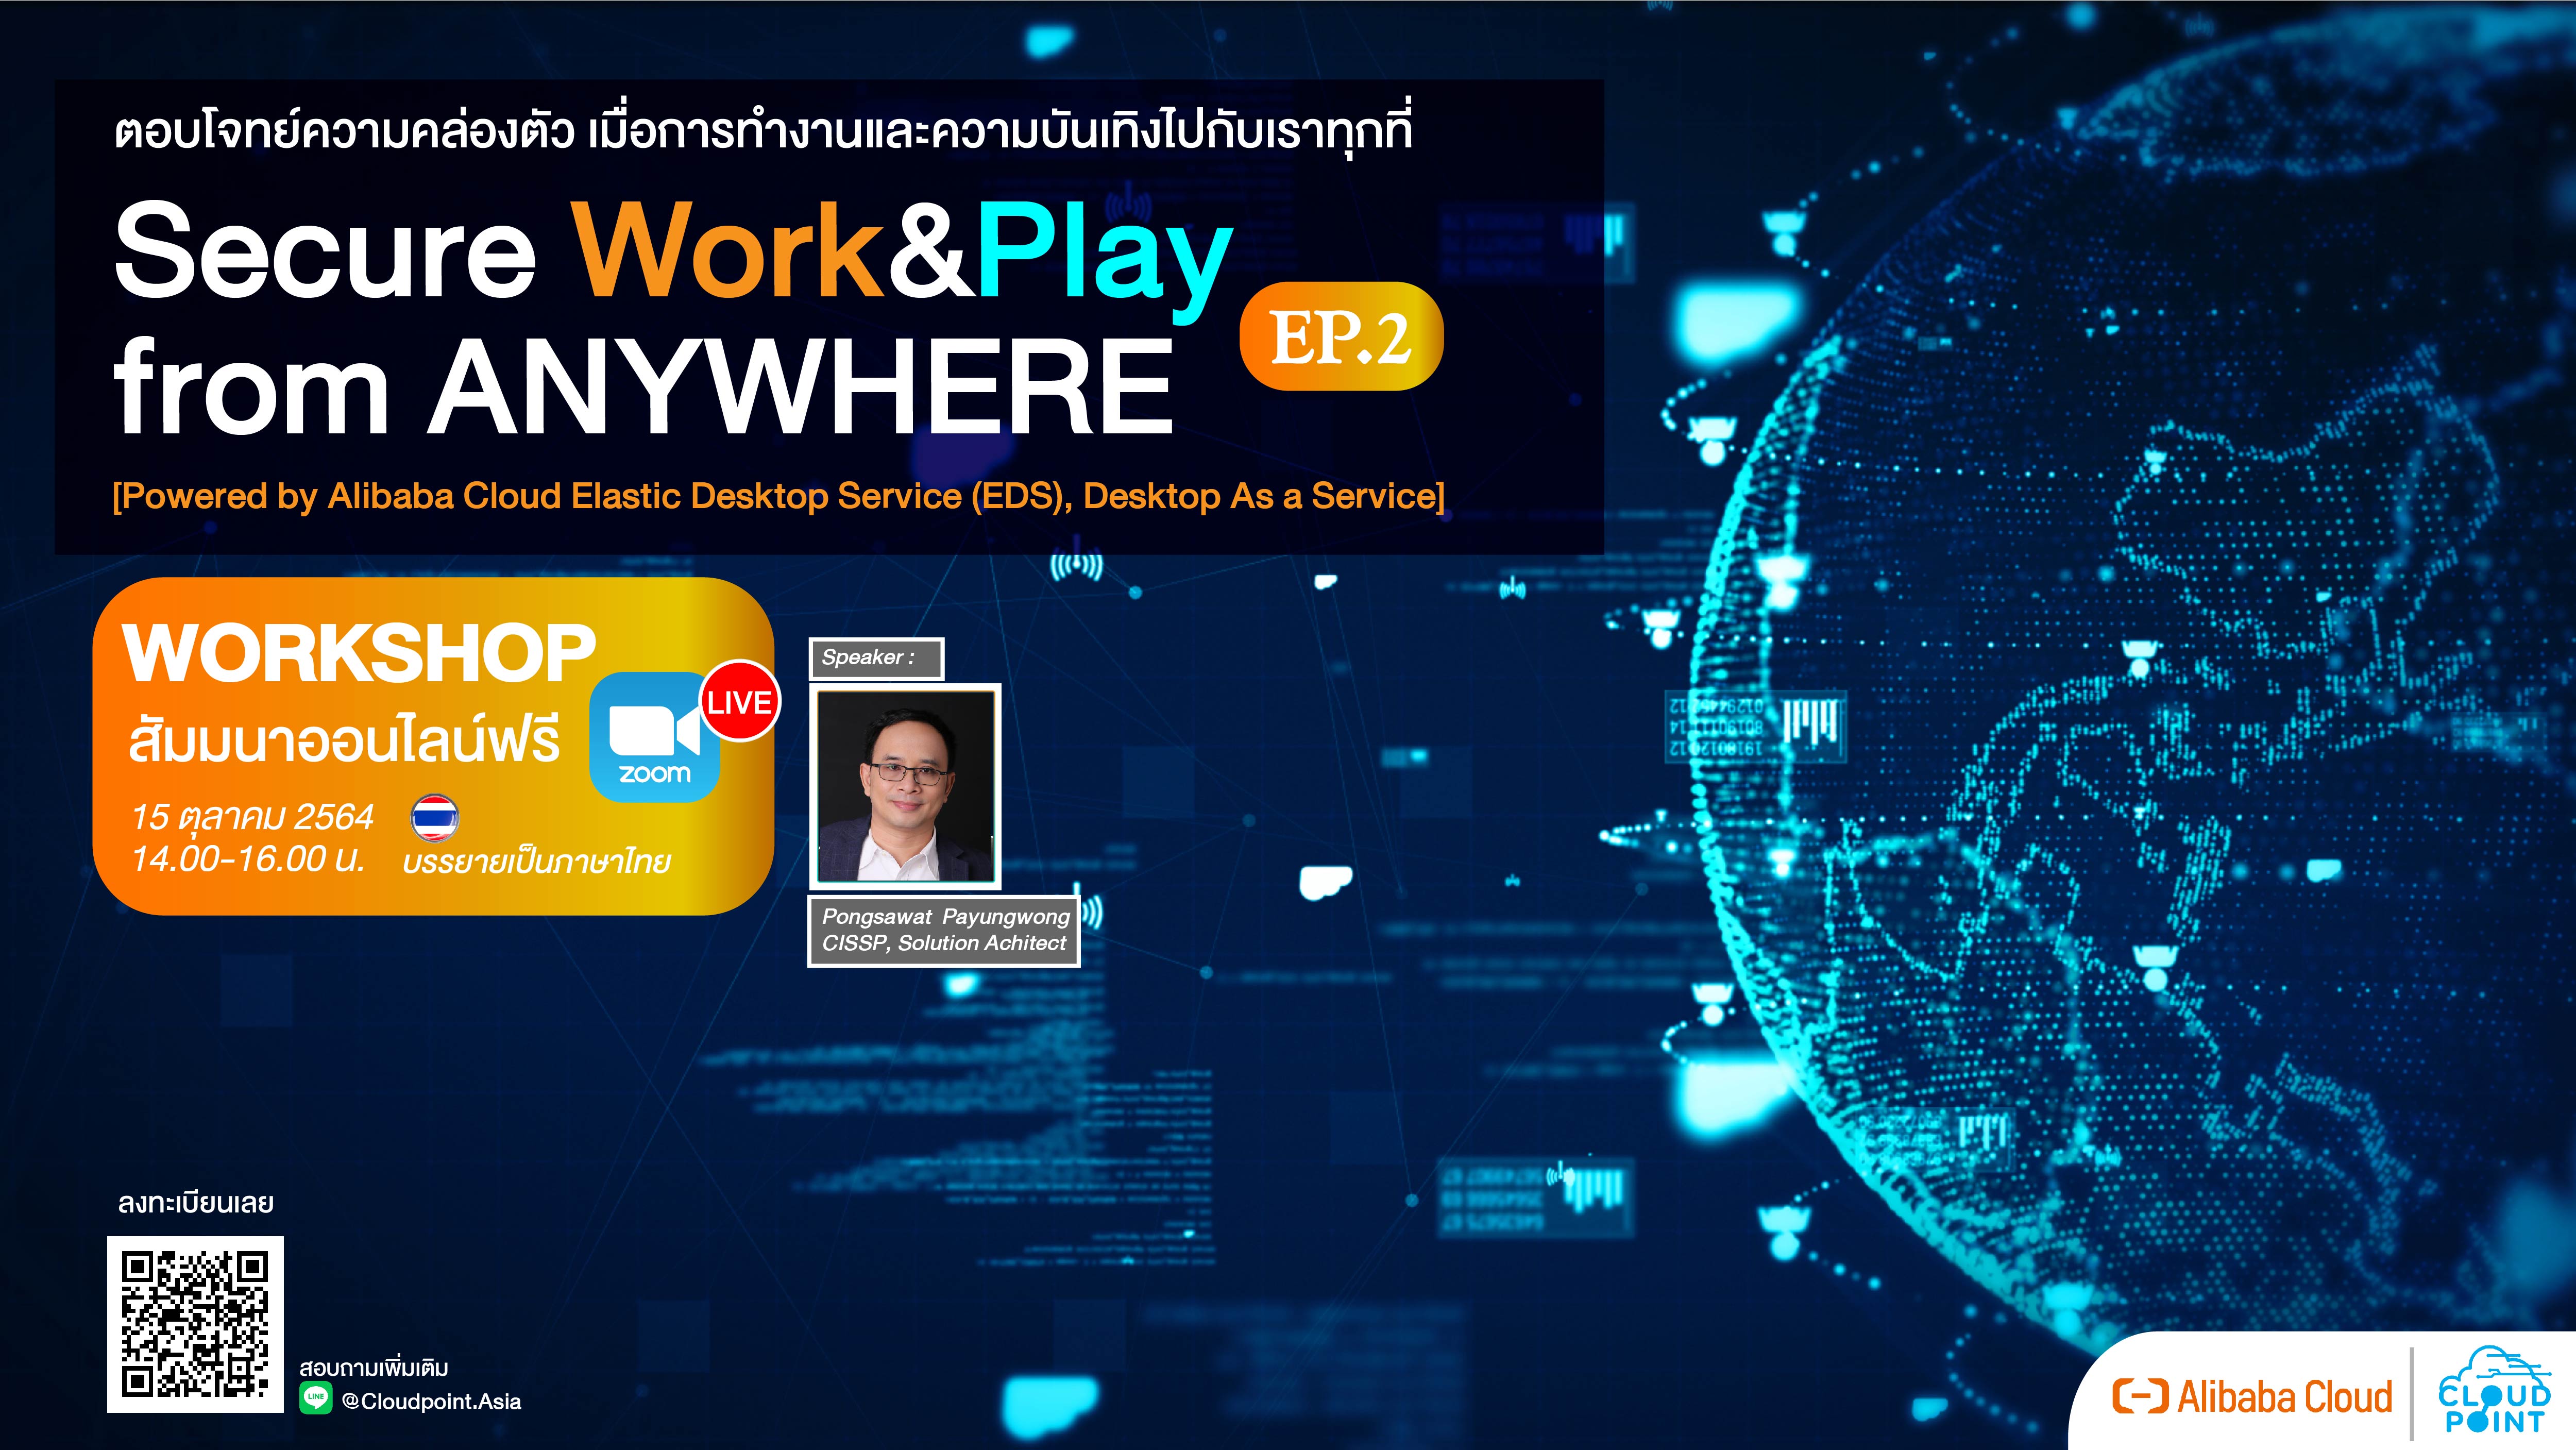 Secure Work&Play from ANYWHERE - EP2